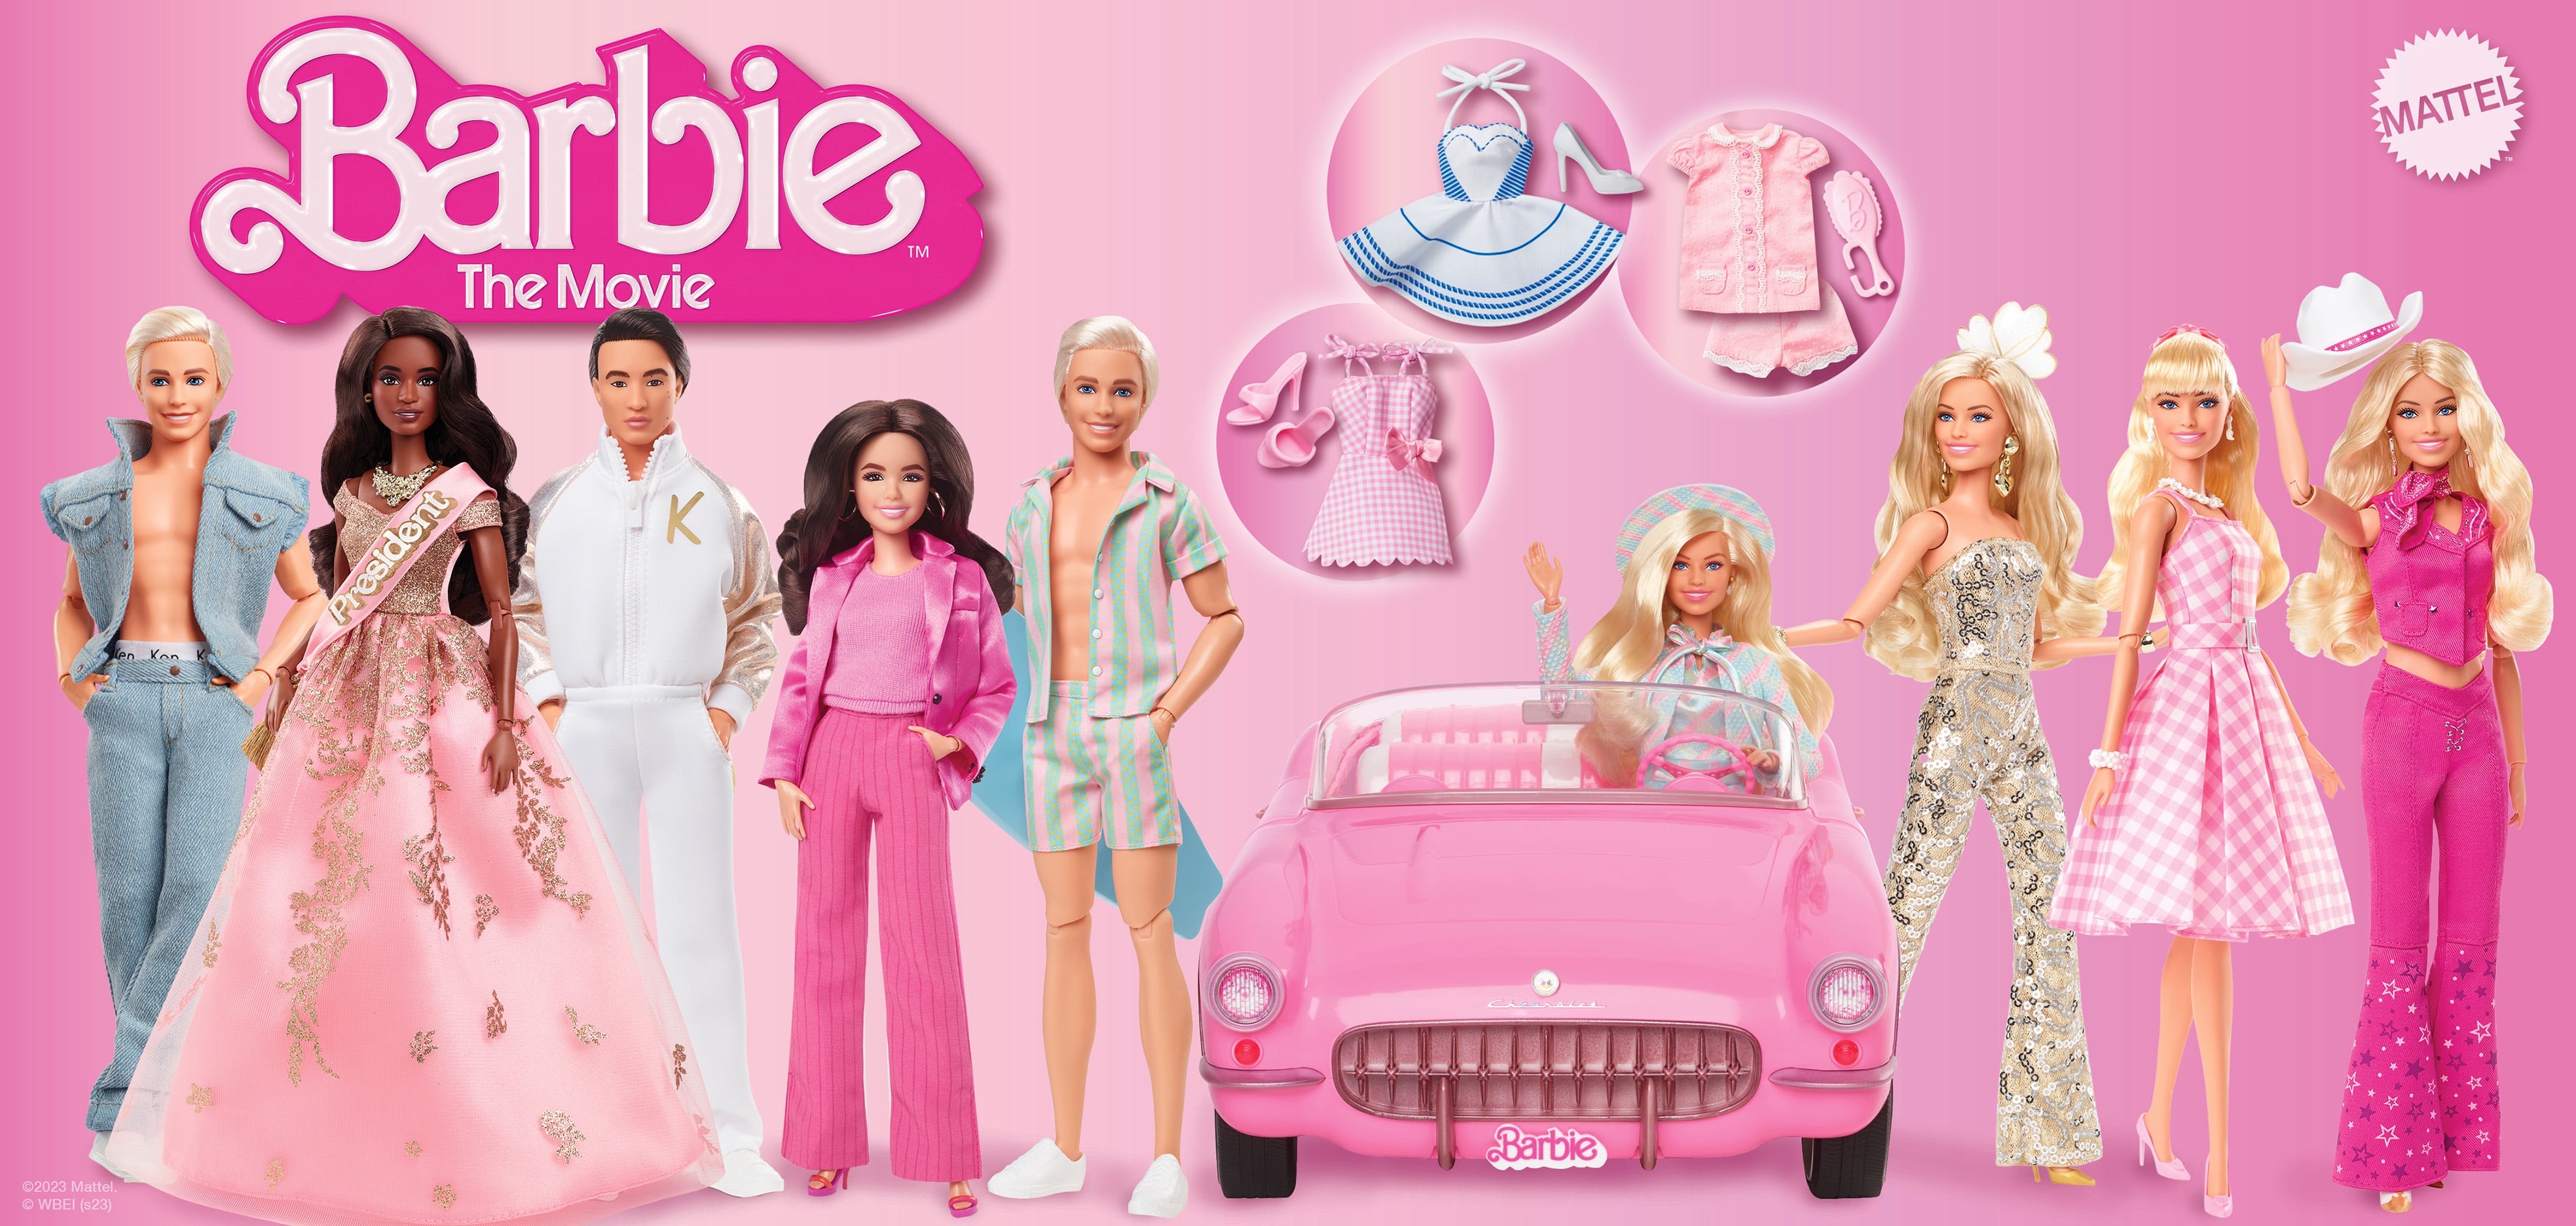 Happy National Barbie Day! A Brief History of Black Barbies - MEFeater